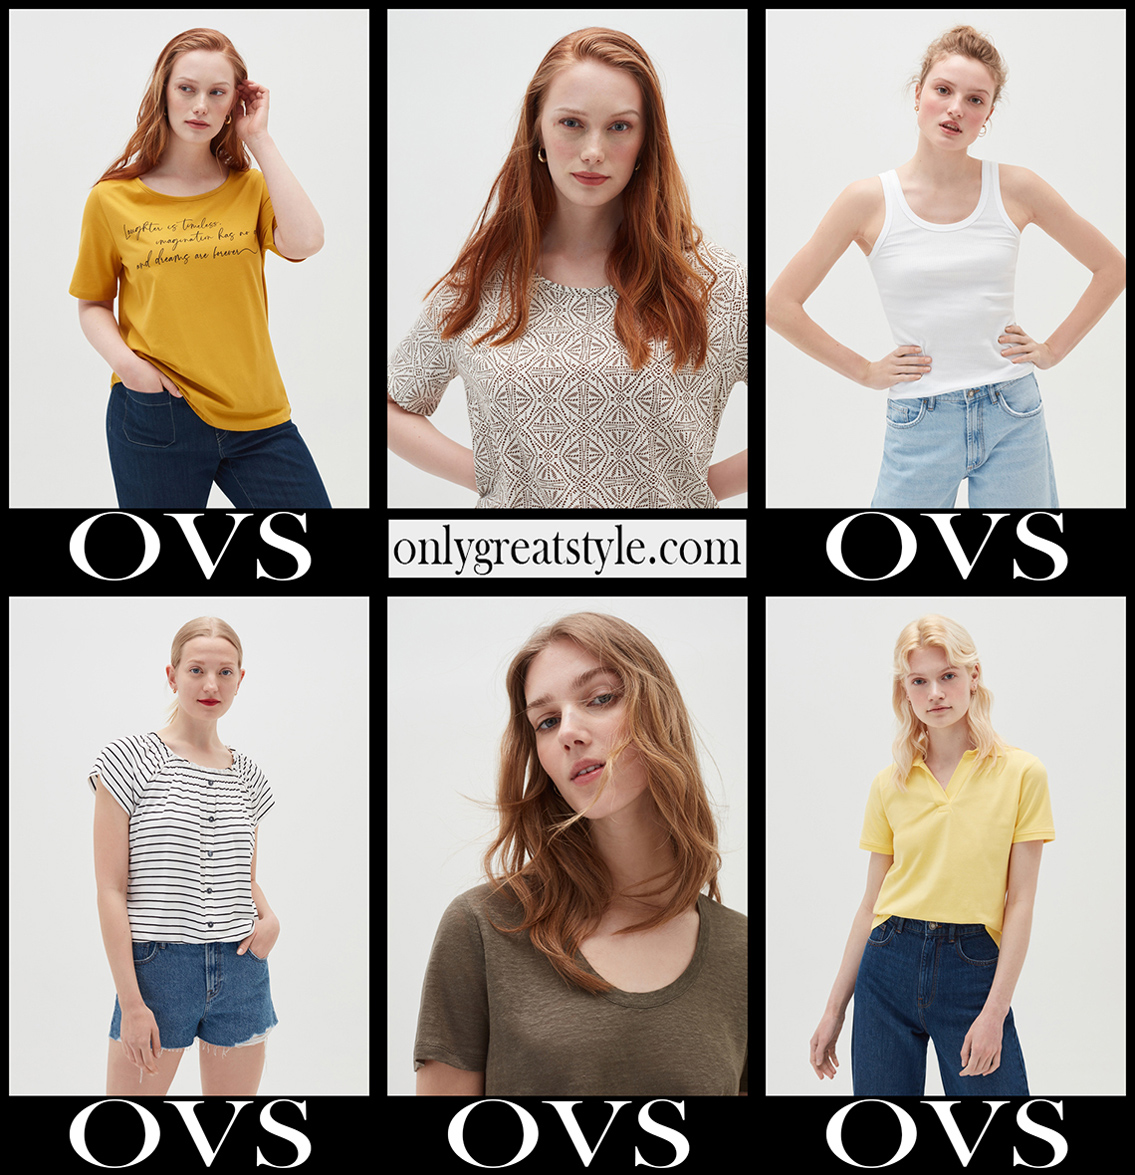 OVS t shirts 2021 new arrivals womens clothing